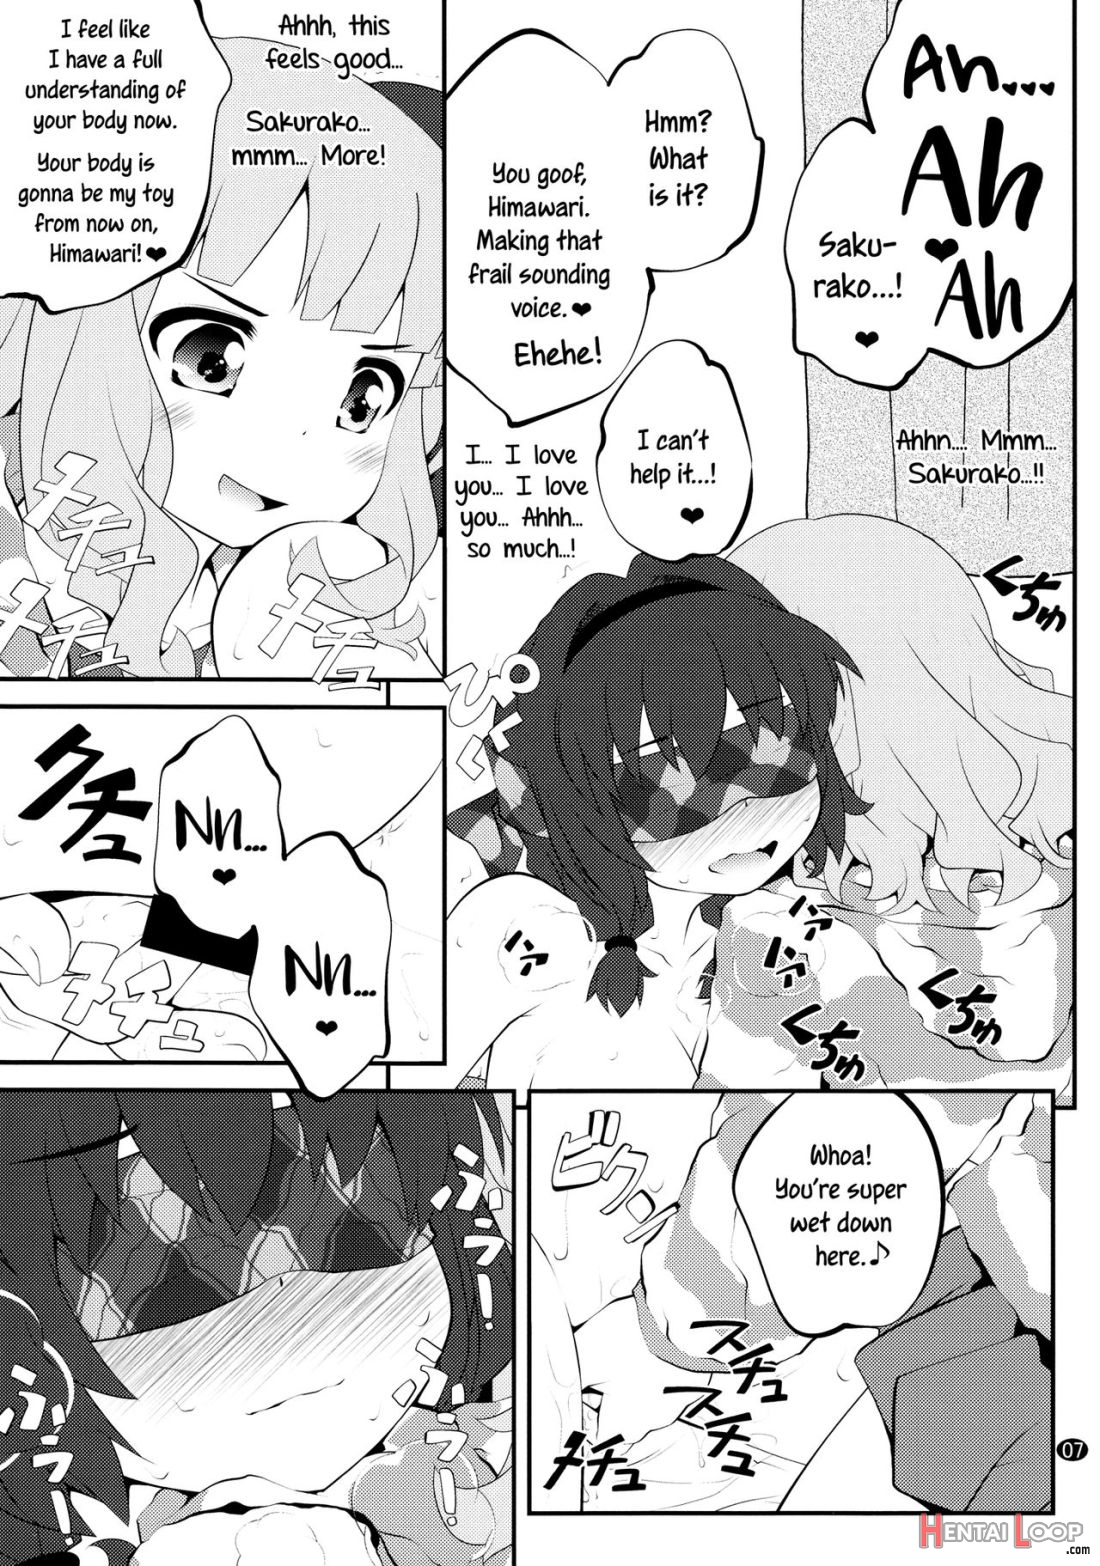 Himegoto Flowers 8 page 6